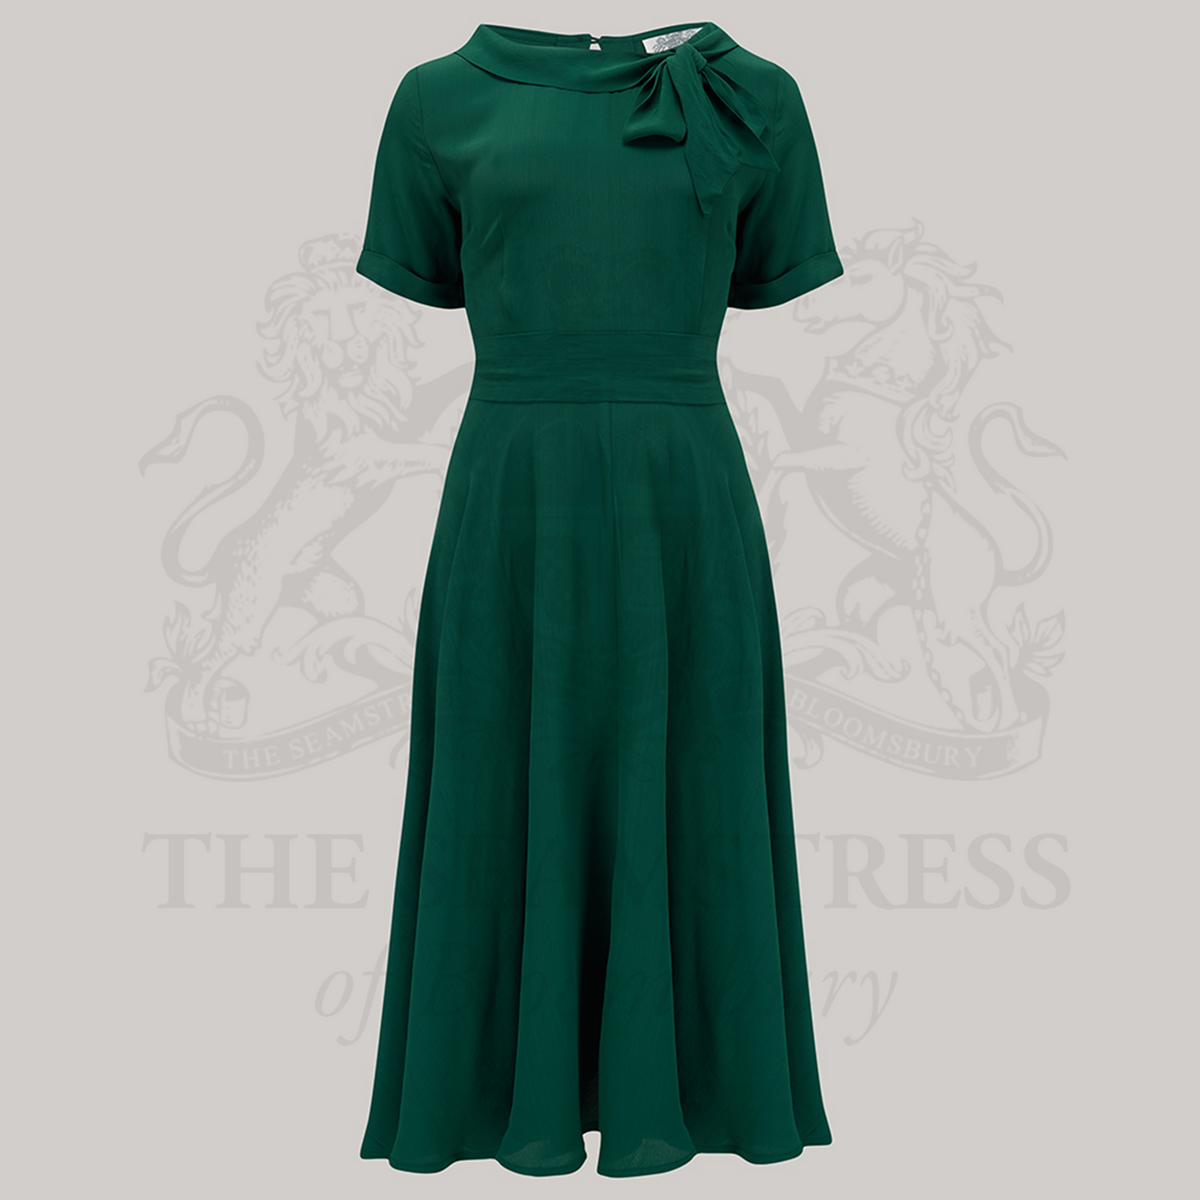 A 1940s vintage style short sleeve dress with a side tie-neck and a tie-waist belt. This dress is in a dark green colour and has a a-line skirt and is designed to finish below the knee.